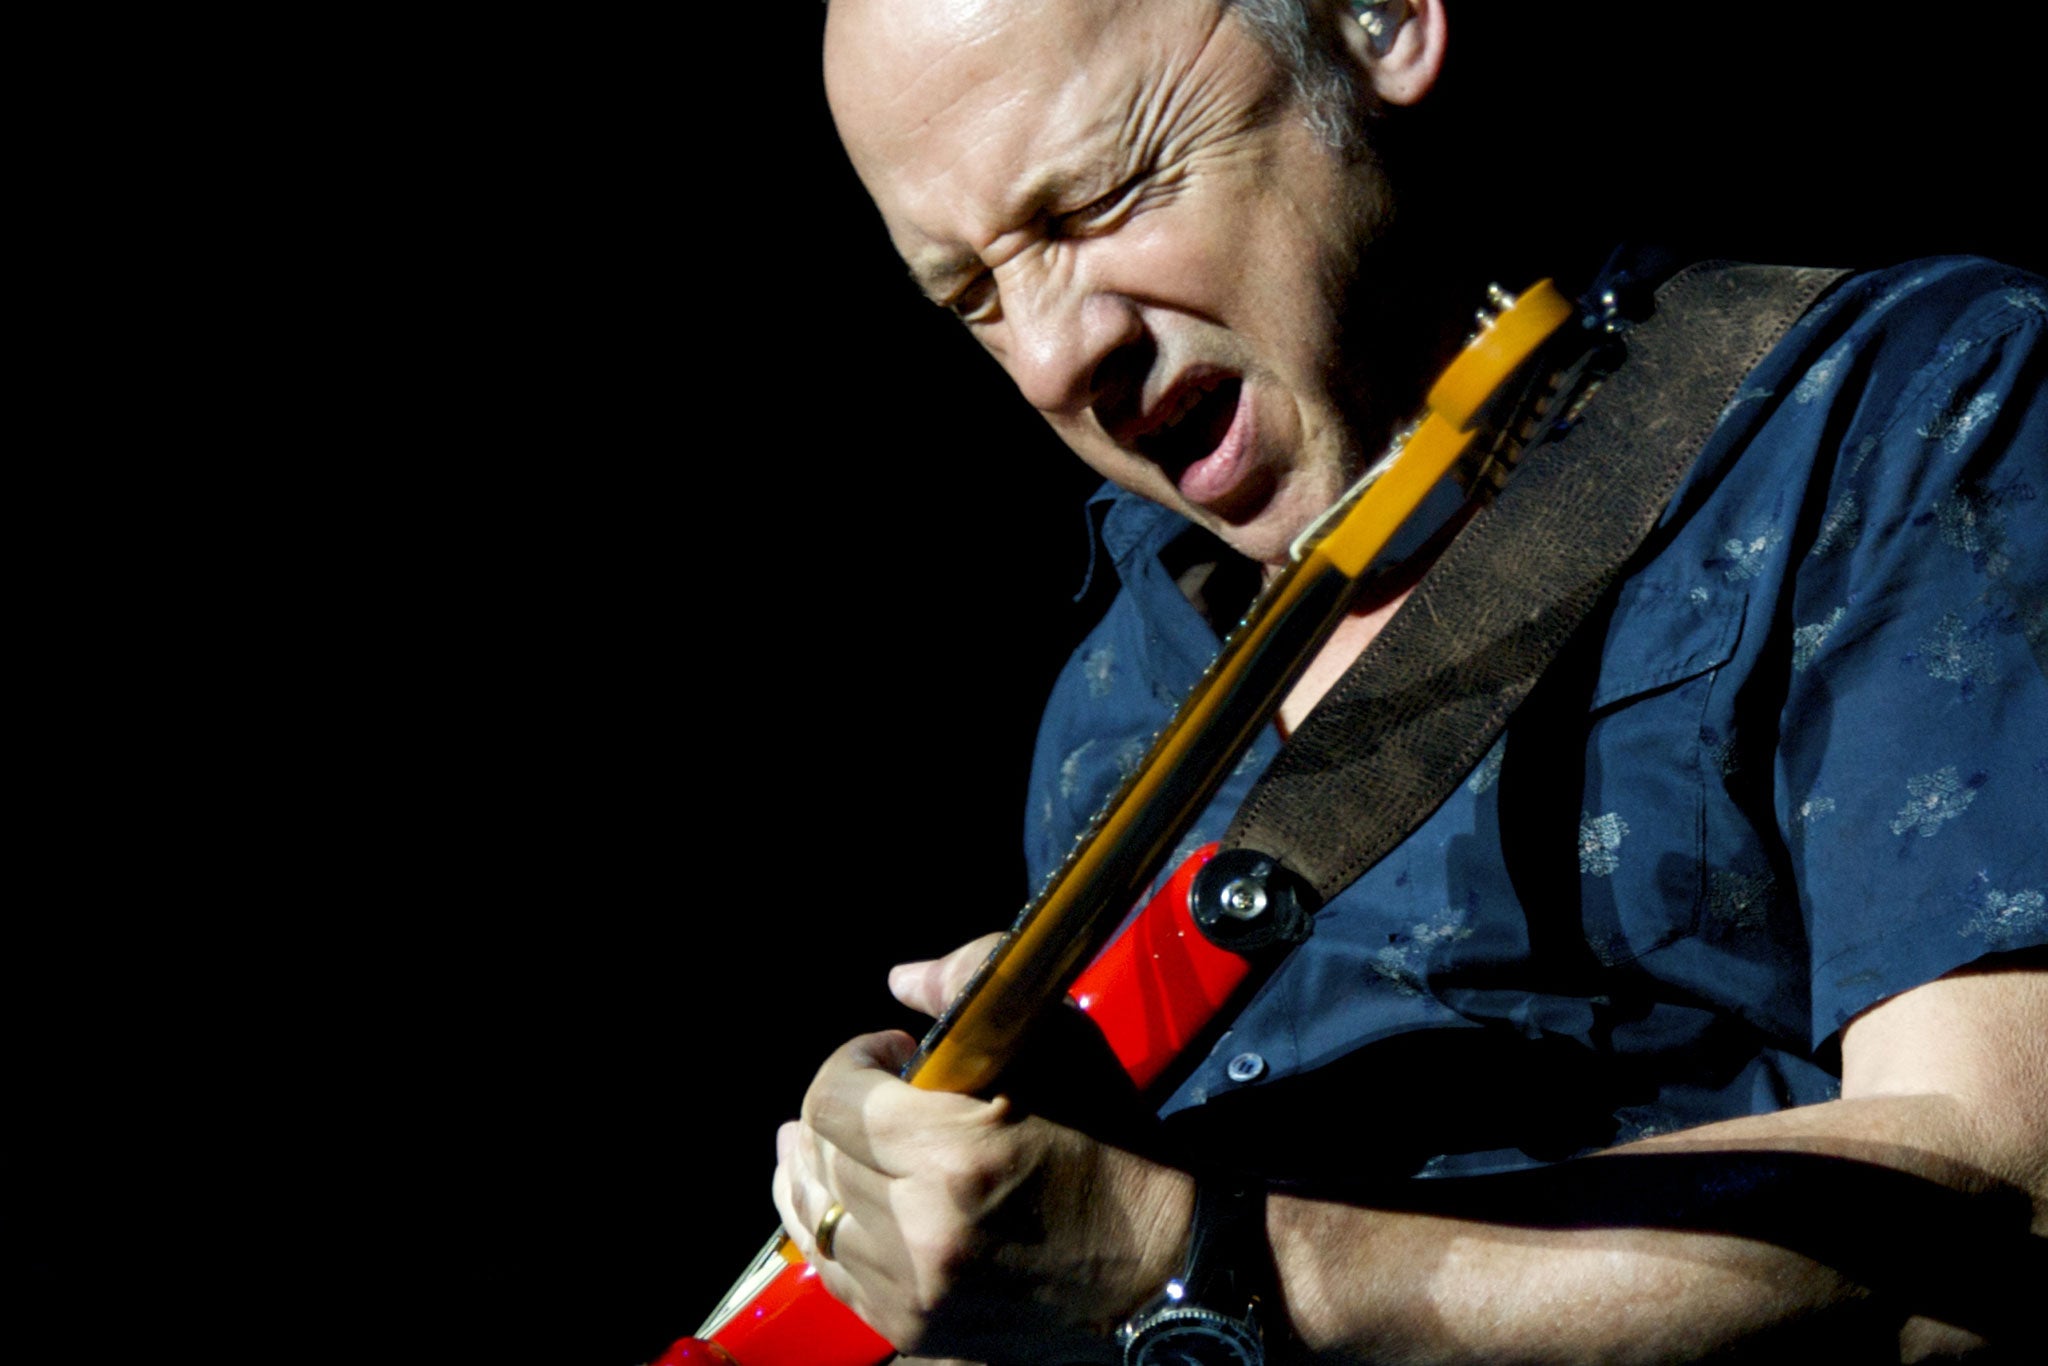 Mark Knopfler, the Dire Straits guitarist, has found himself in a pretty bad strait with the taxman